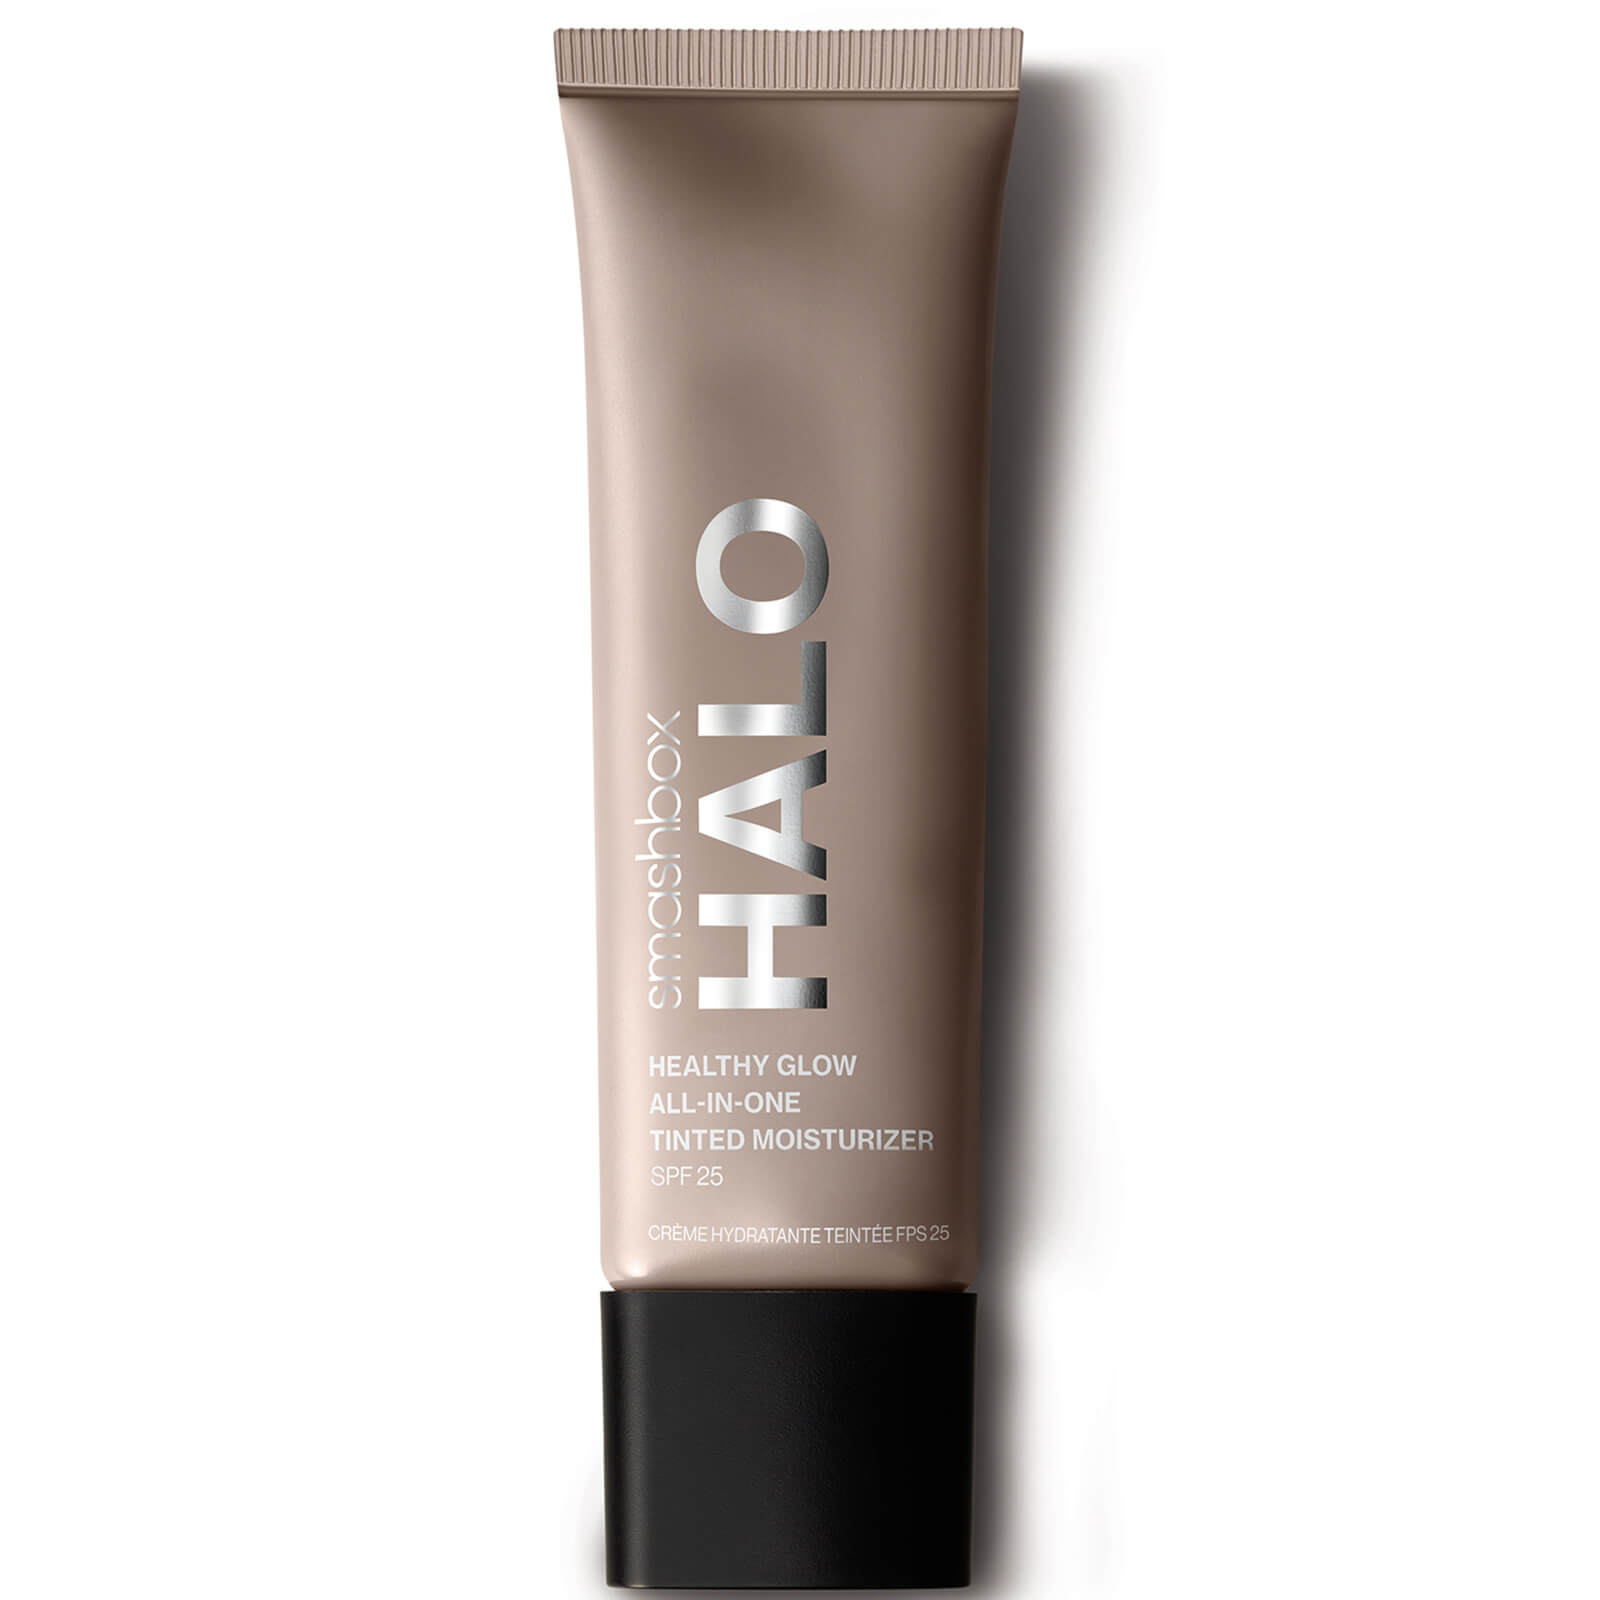 Image of Smashbox Halo Healthy Glow All-in-One SPF25 Tinted Moisturiser 40ml (Various Shades) - Deep Golden